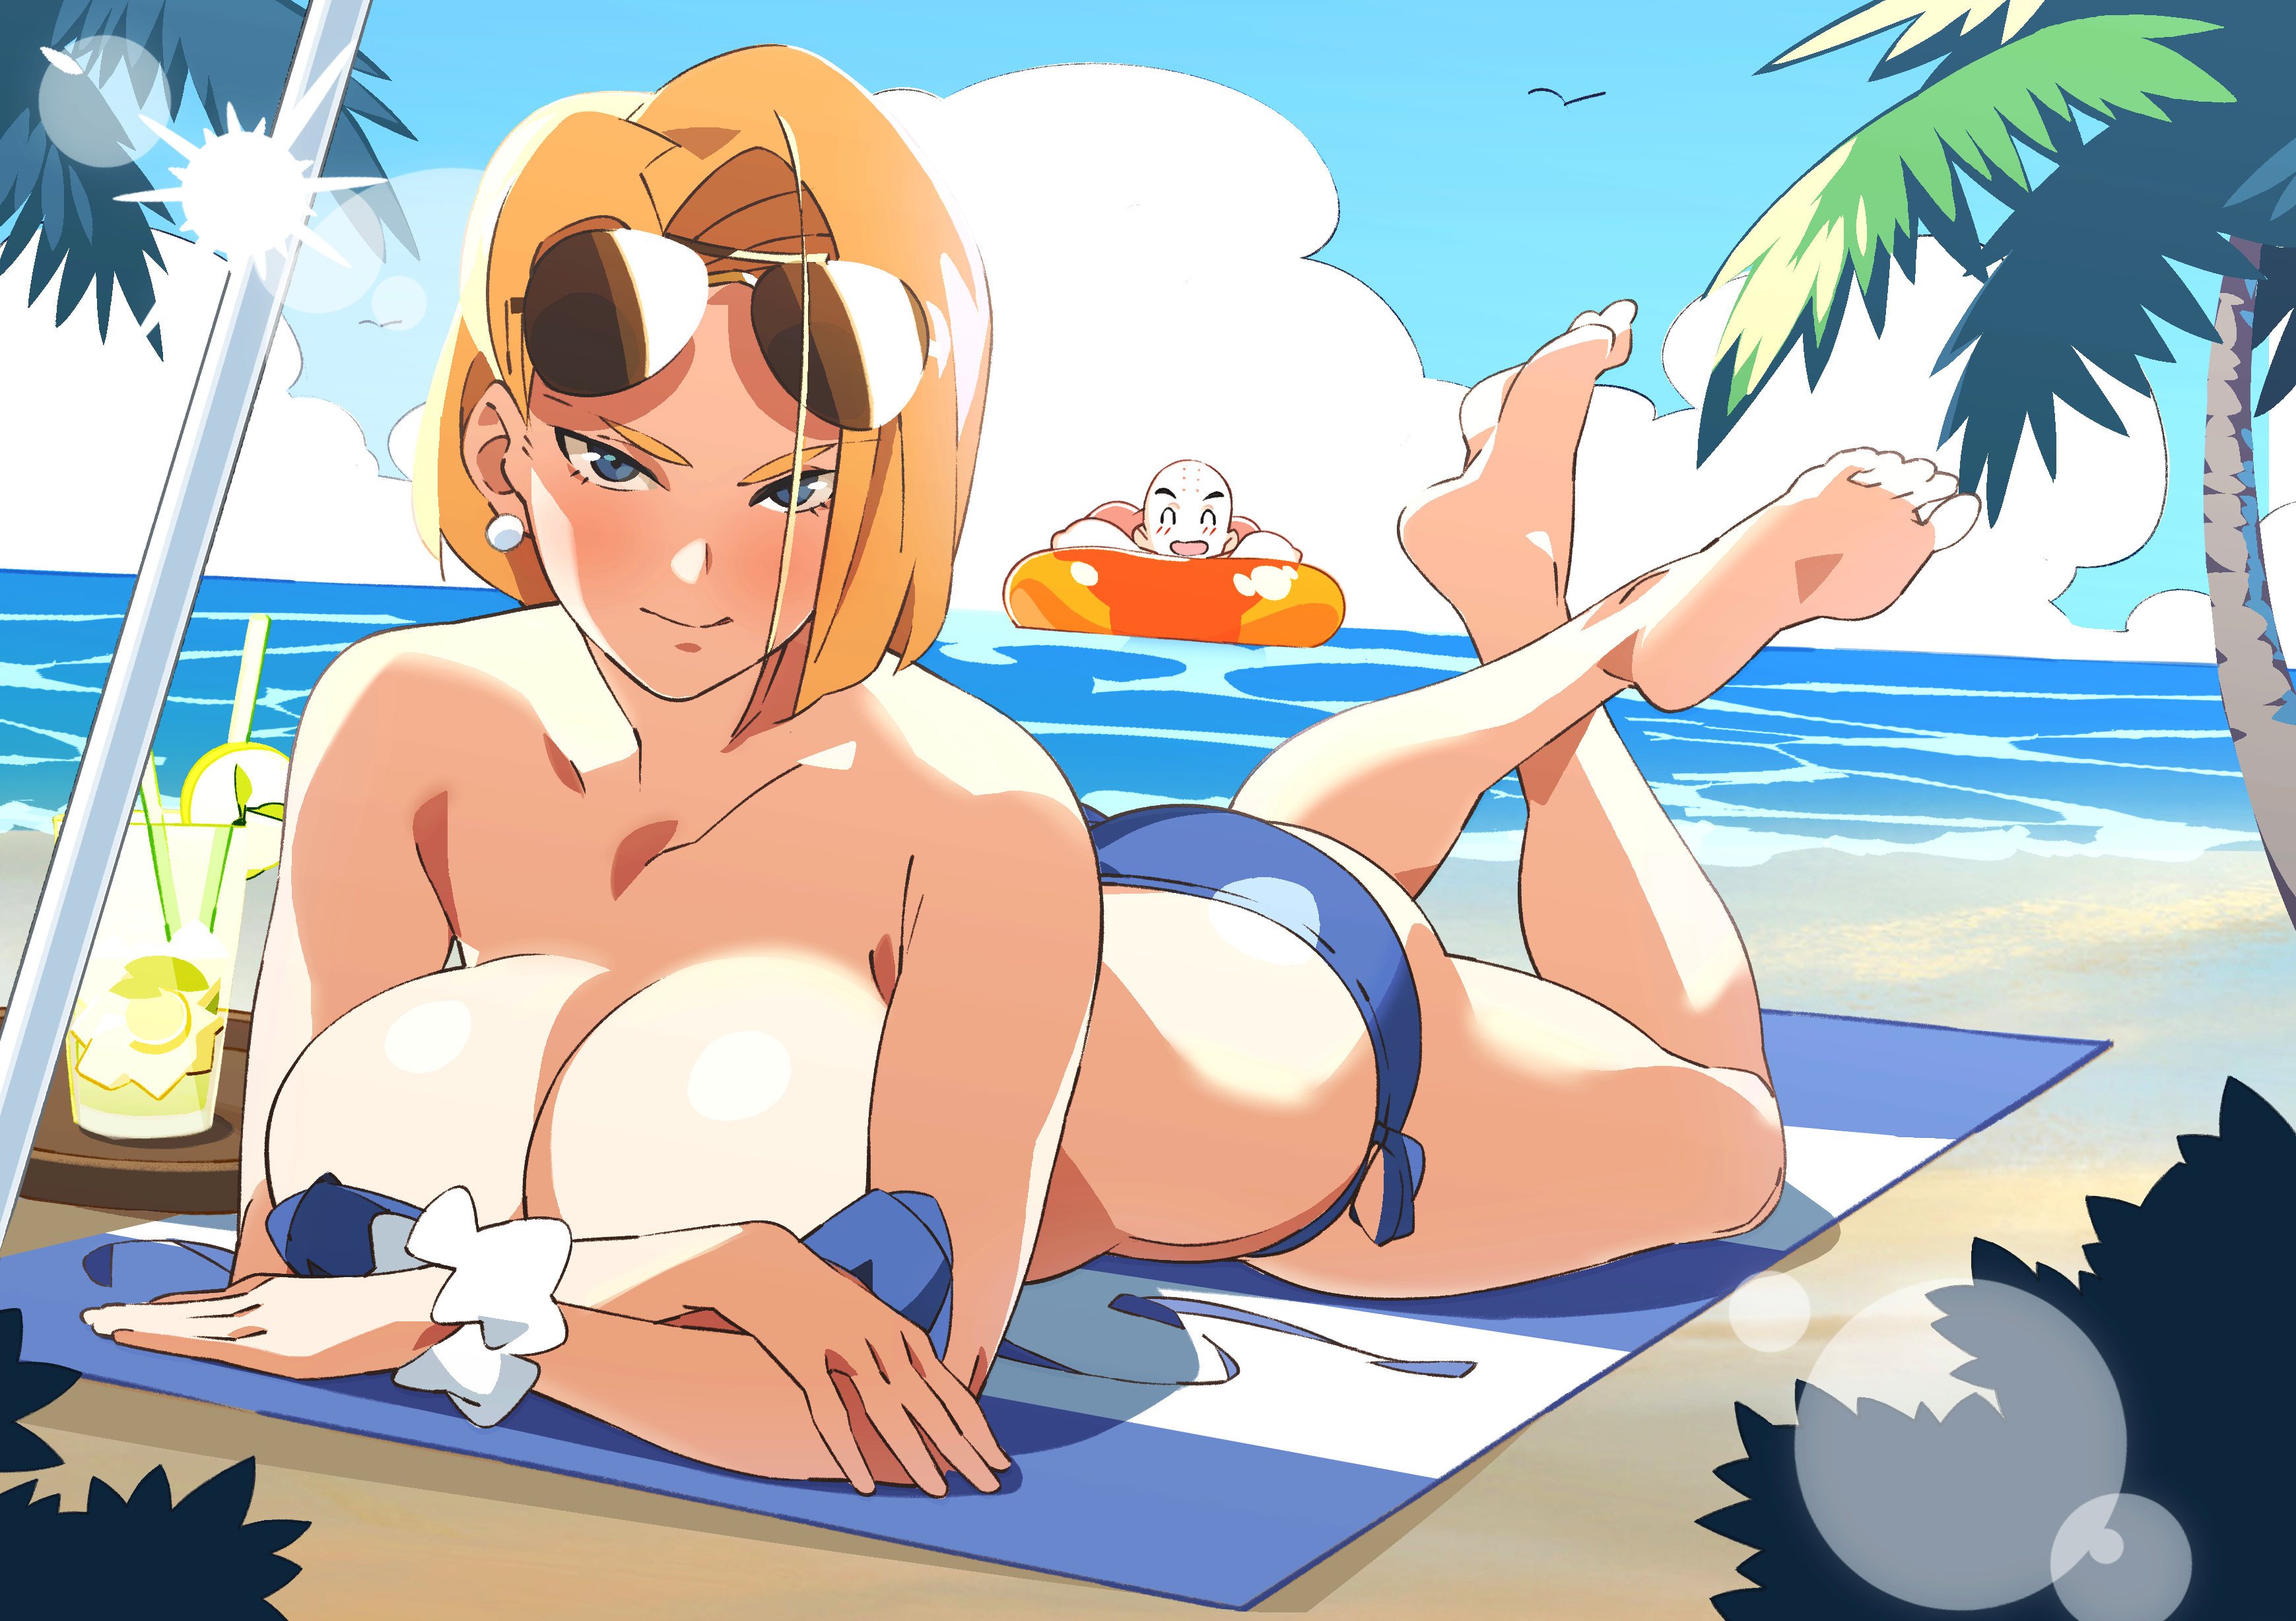 Anime 3478x2456 Android 18 Dragon Ball Dragon Ball Z Dragon Ball Super anime girls lying on front cleavage big boobs bikini beach Krillin water floater sand drink palm trees looking at viewer sunglasses feet foot sole feet in the air anime boys feet crossed